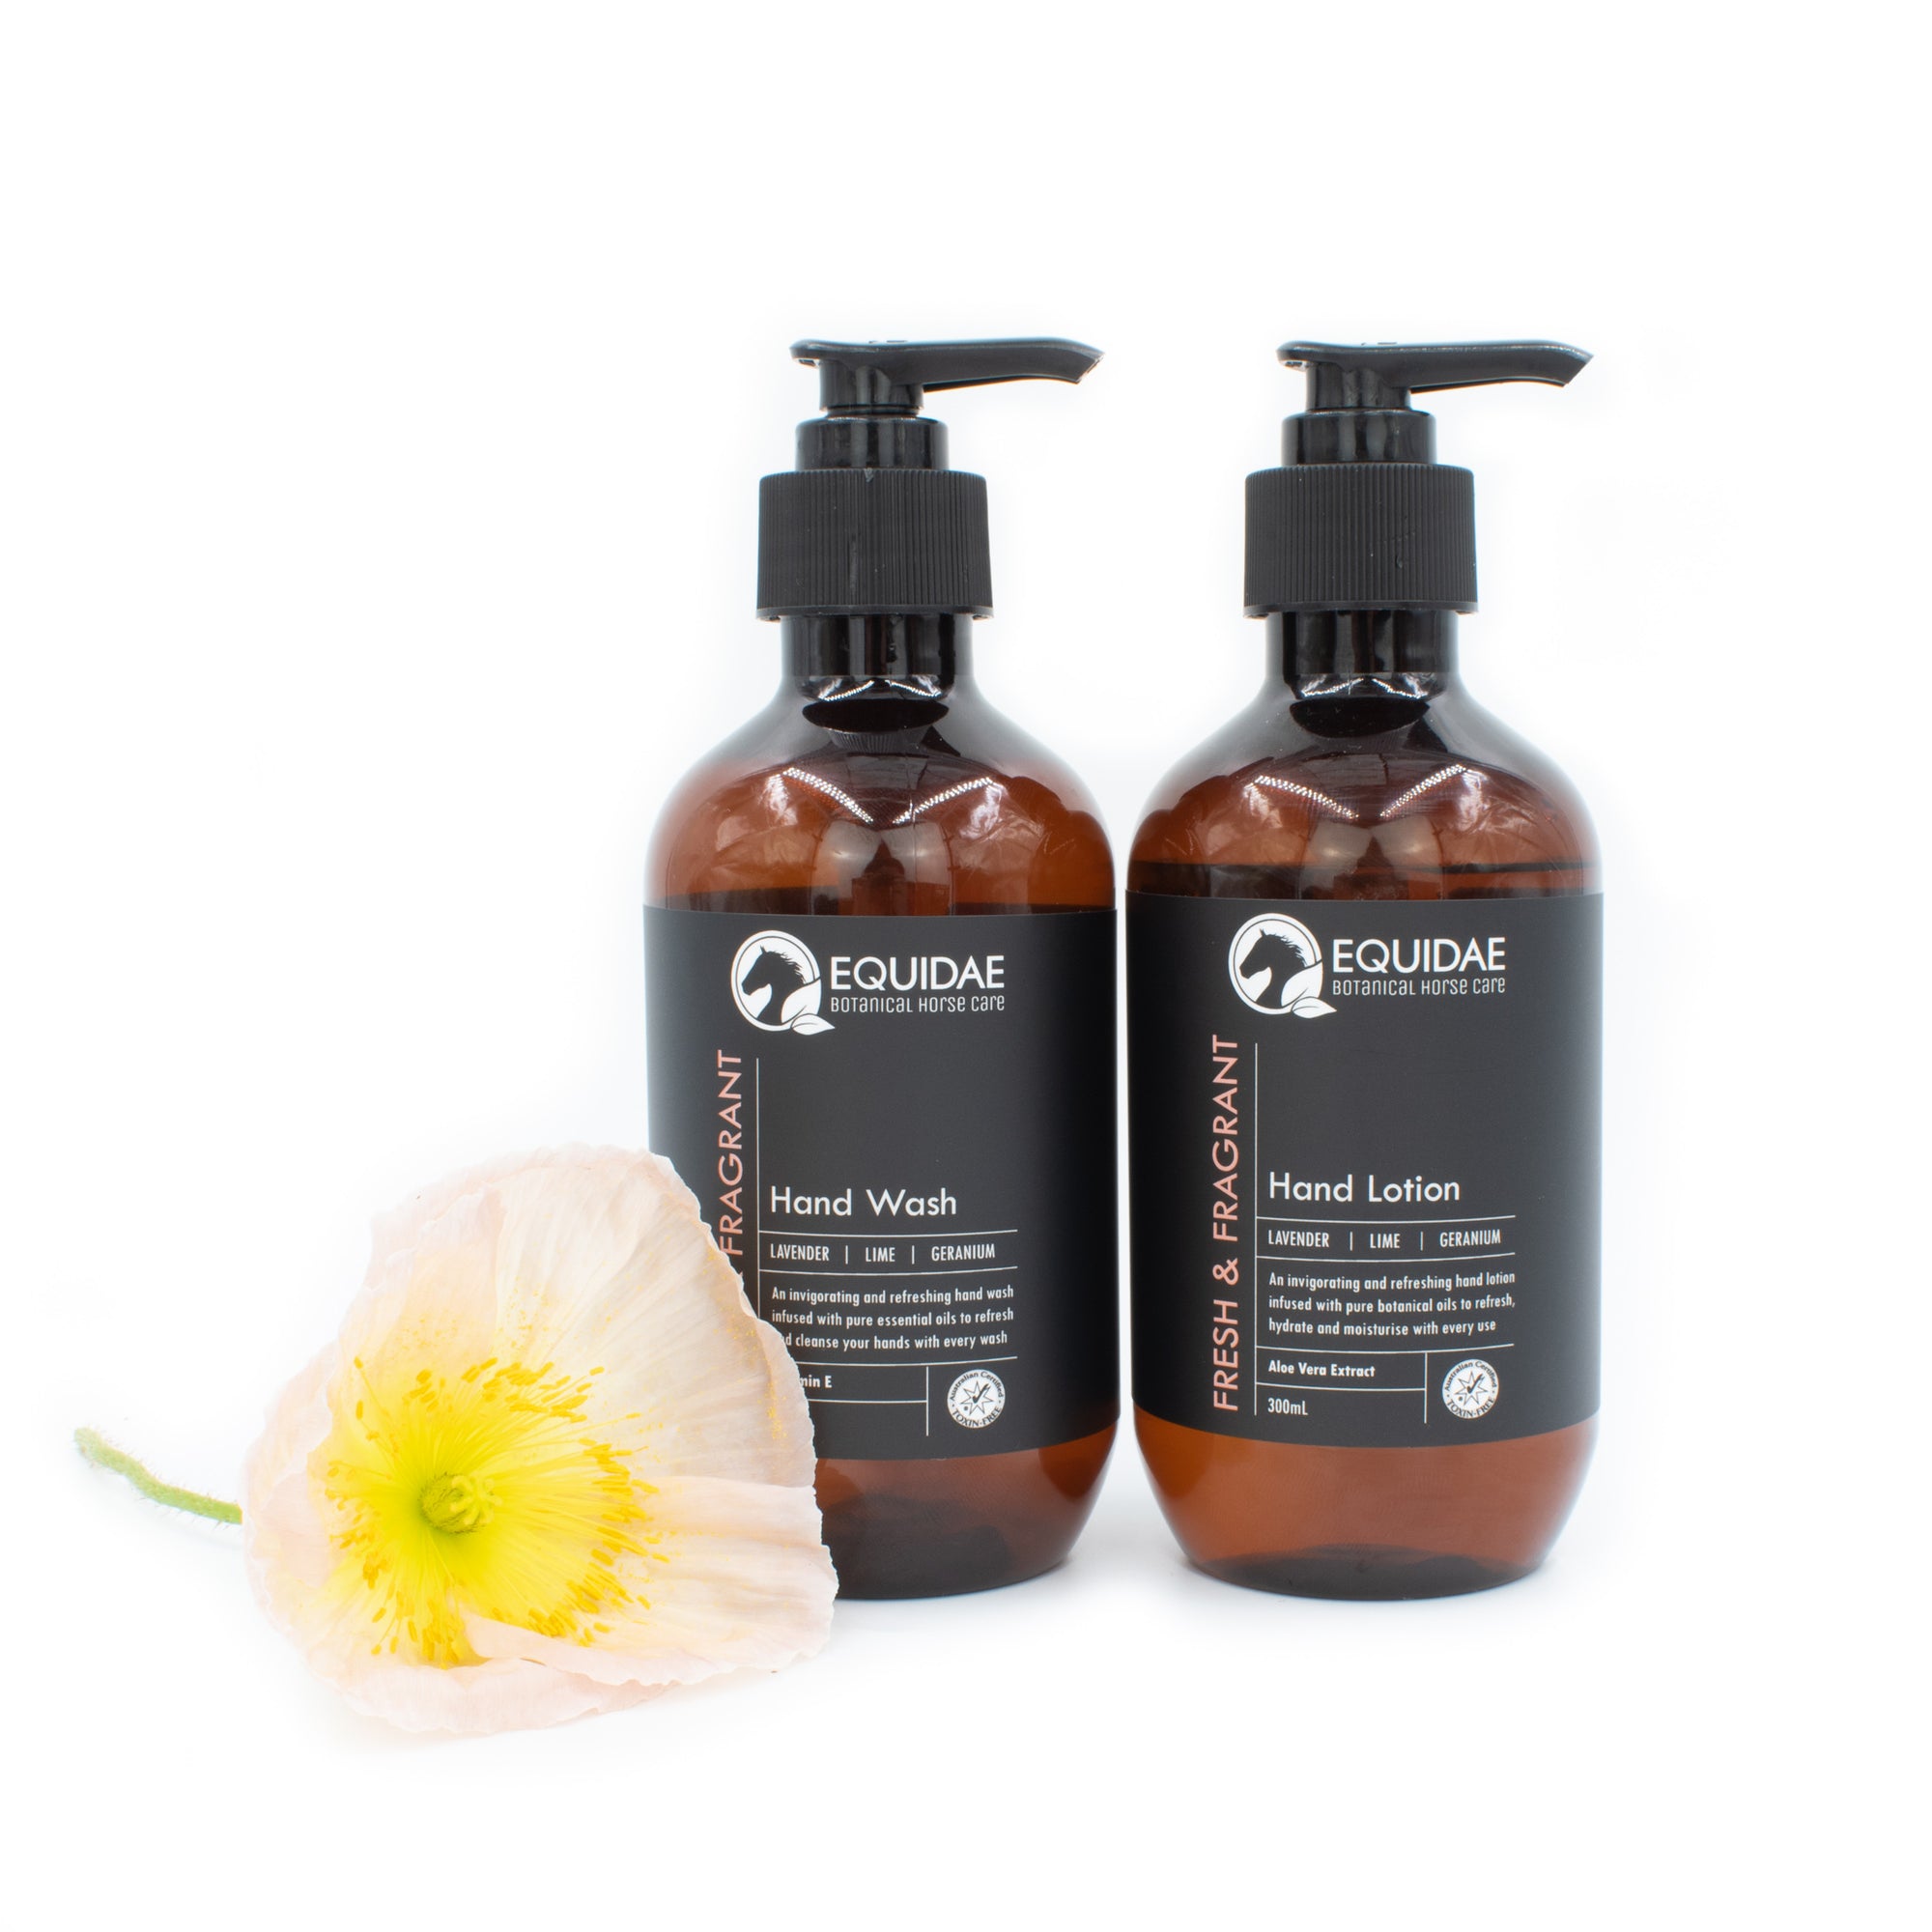 FRESH & FRAGRANT Hand Wash and Hand Lotion Pack with a Calico bag